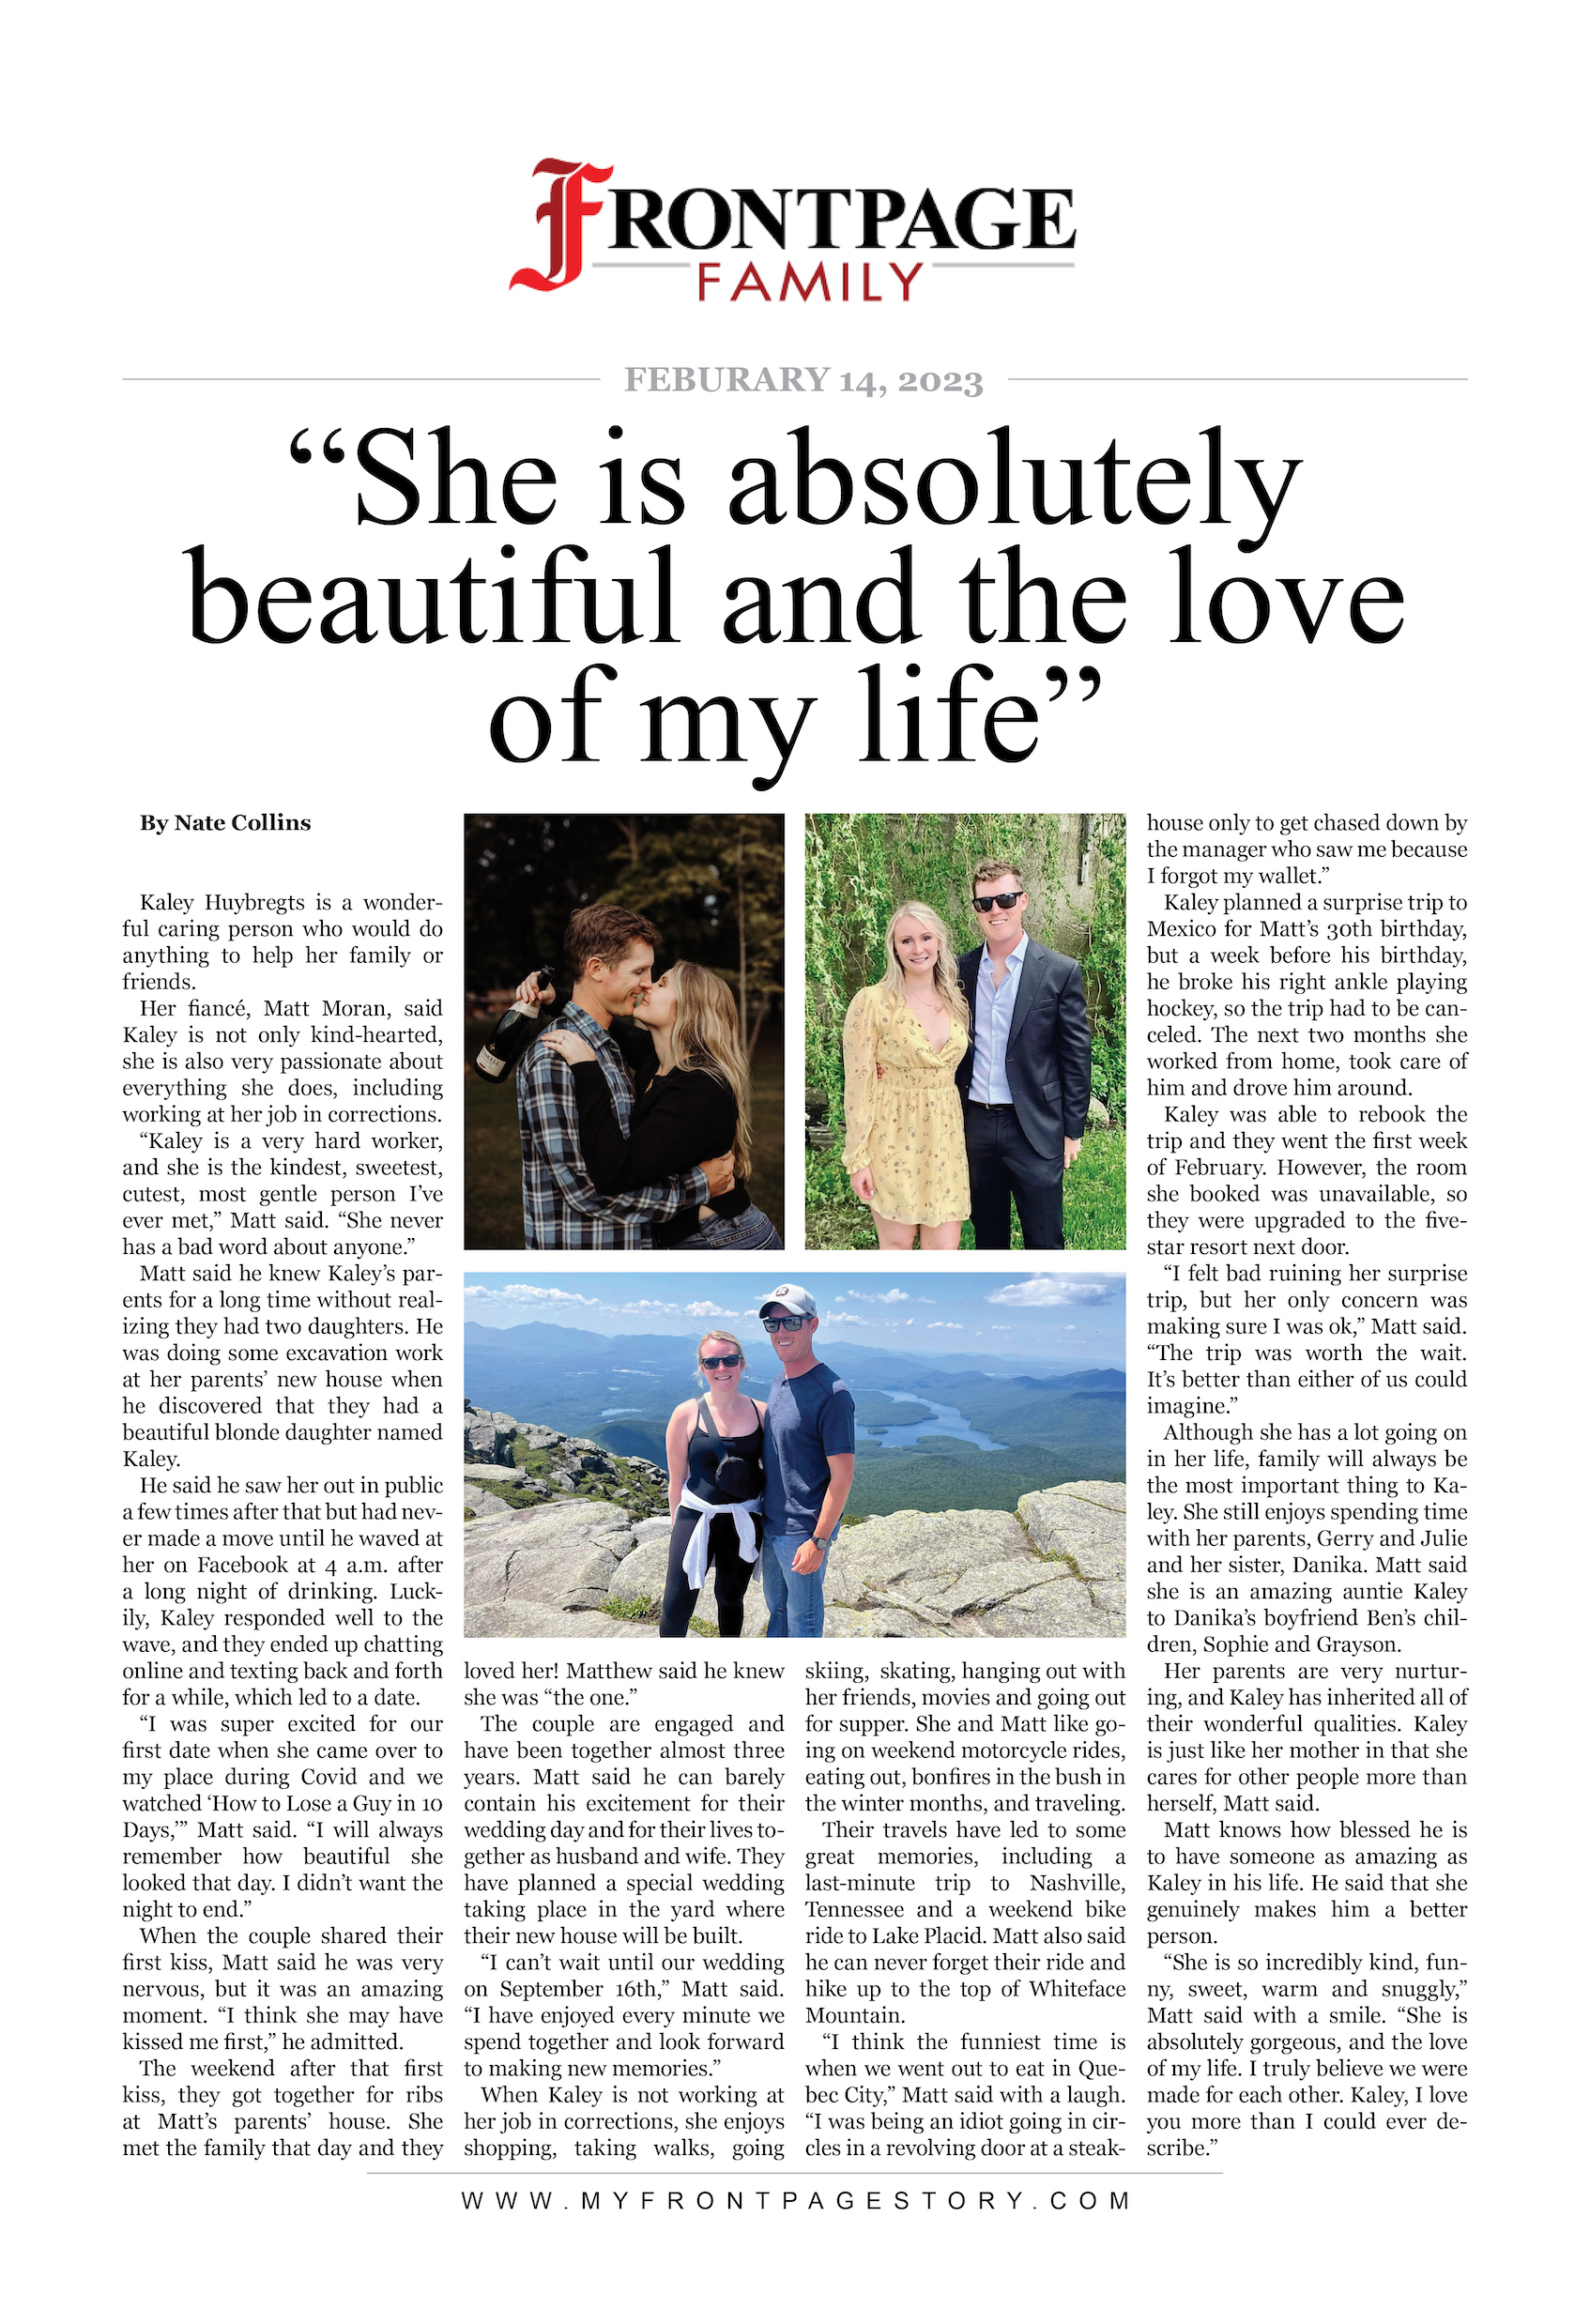 A frontpage story about Kaley Huybregts titled “She is absolutely beautiful and the love of my life"